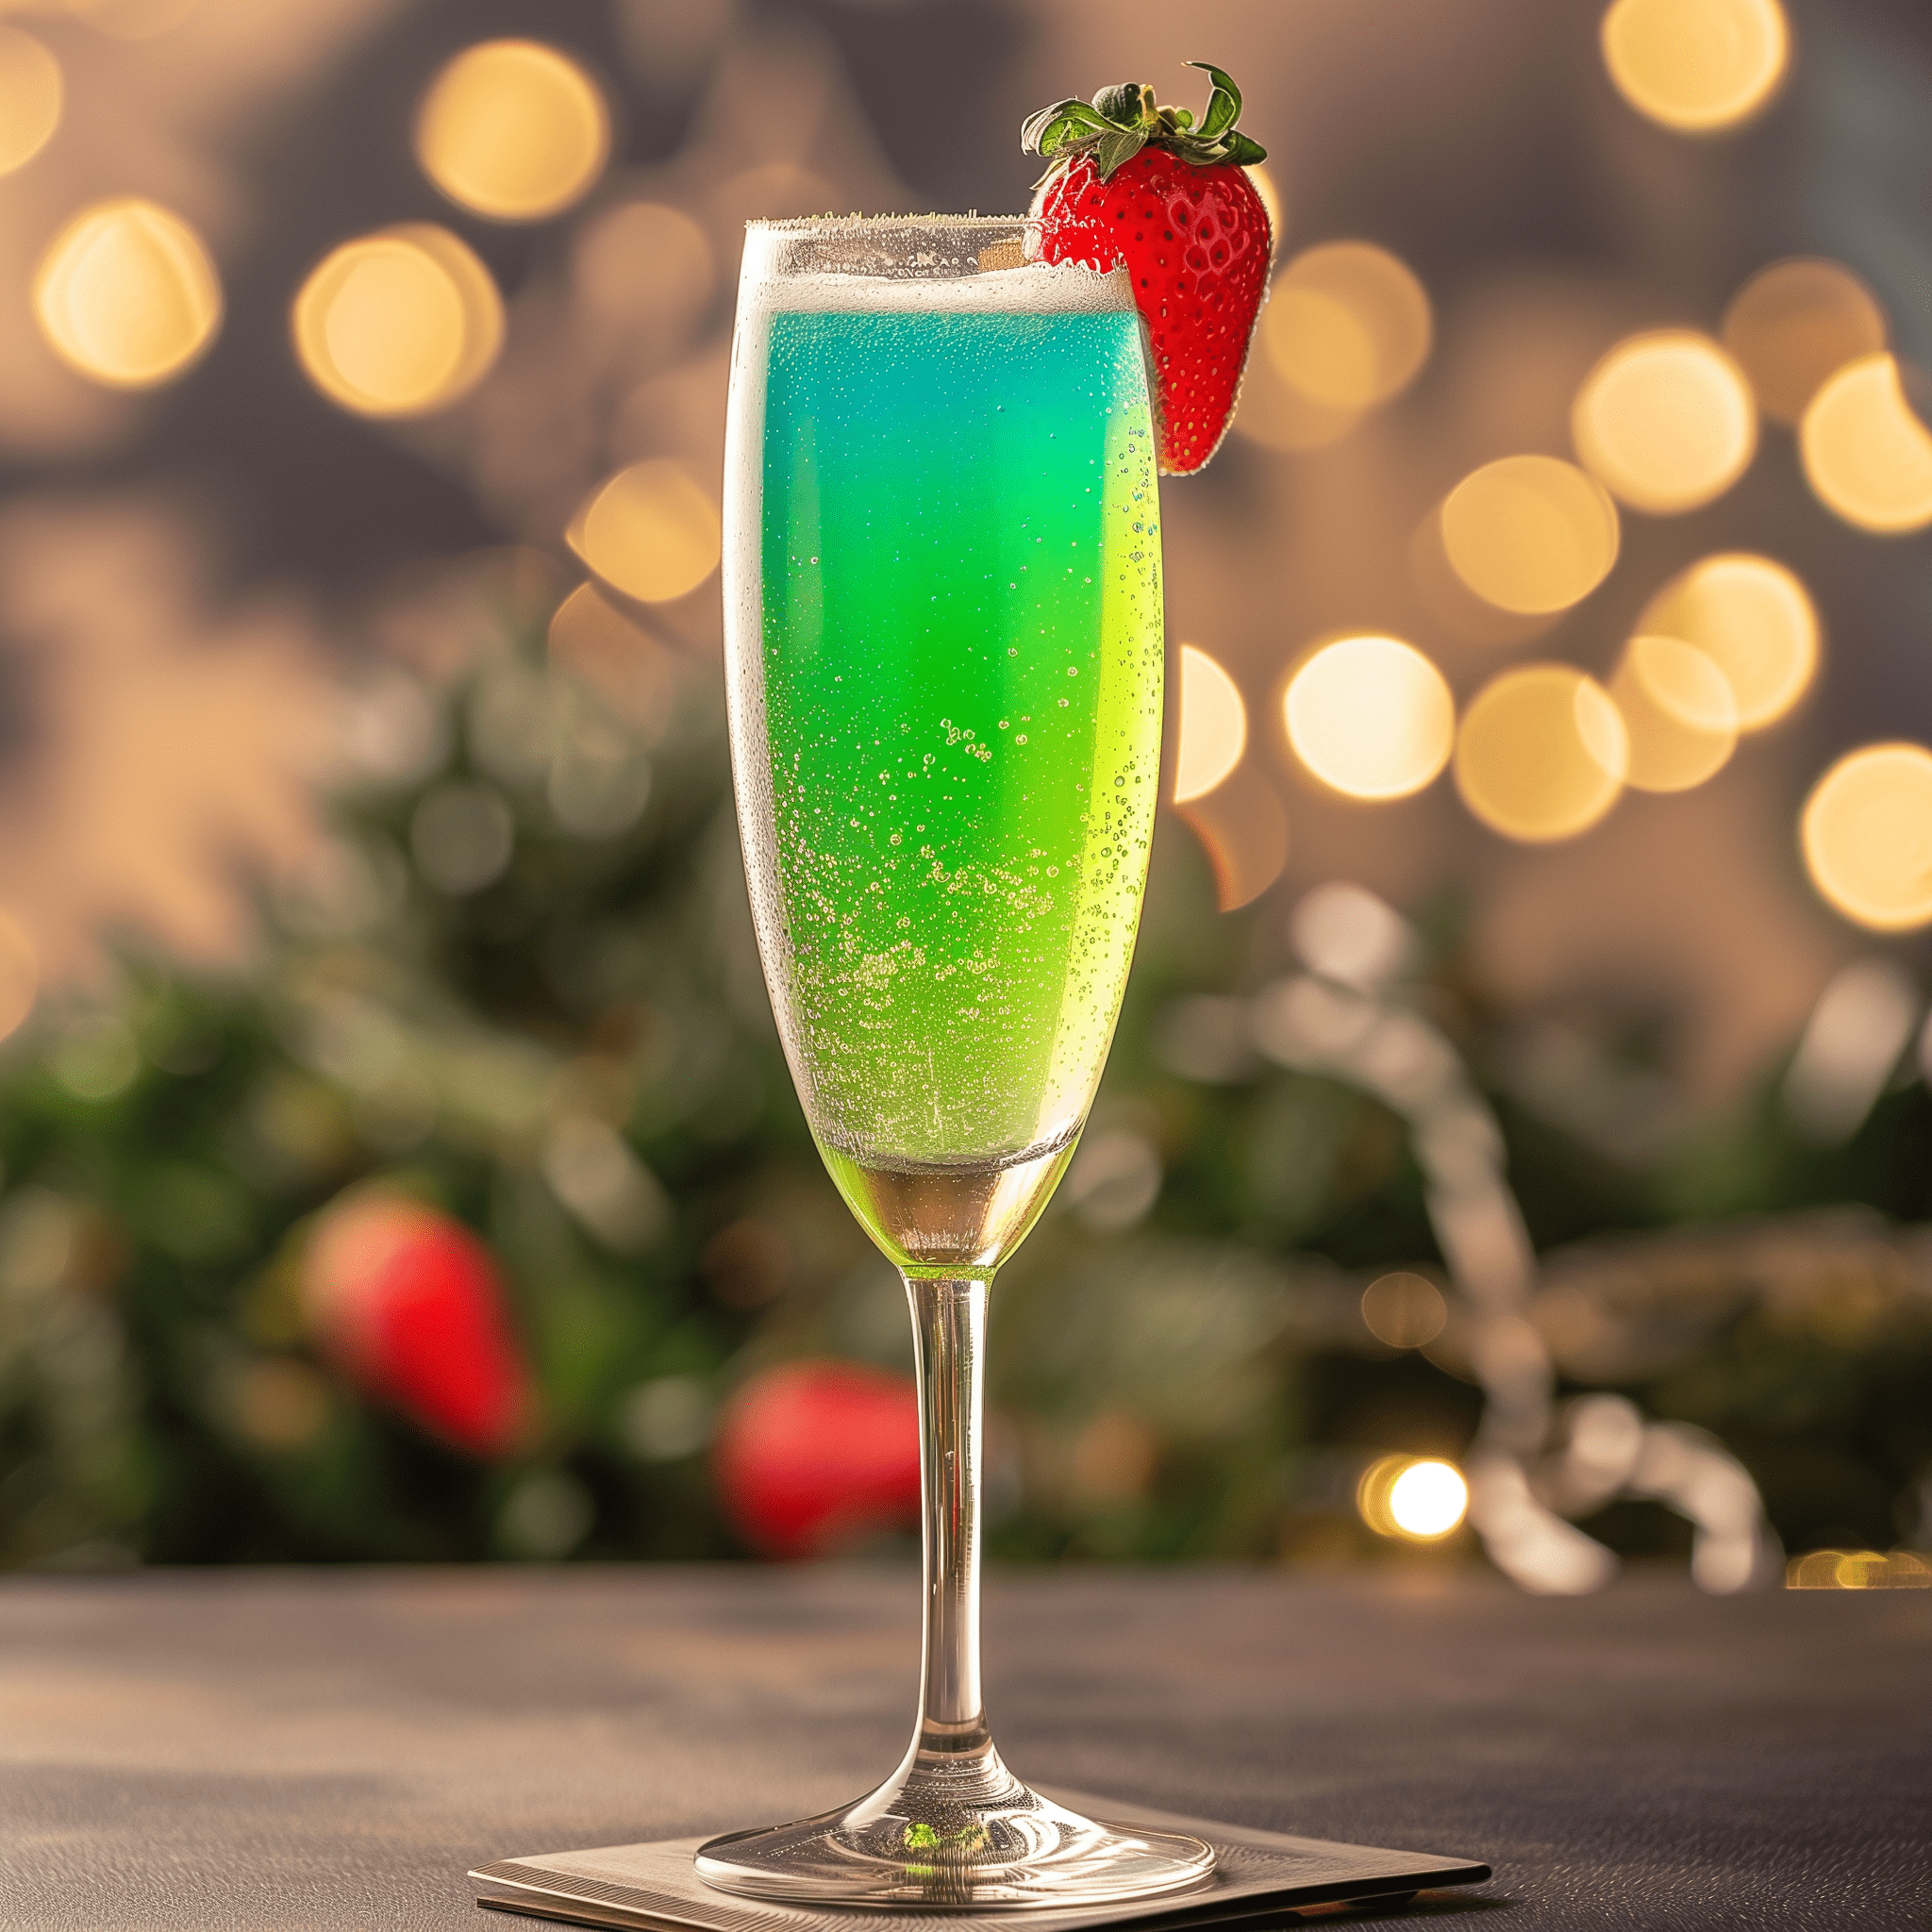 Grinch Mimosa Cocktail Recipe - The Grinch Mimosa offers a delightful balance of sweet and tart flavors. The orange juice provides a fresh citrusy sweetness, while the blue curacao adds a hint of tropical fruitiness and a slight bitter edge. The champagne tops it off with effervescence and a touch of dryness, making it a light and refreshing choice.